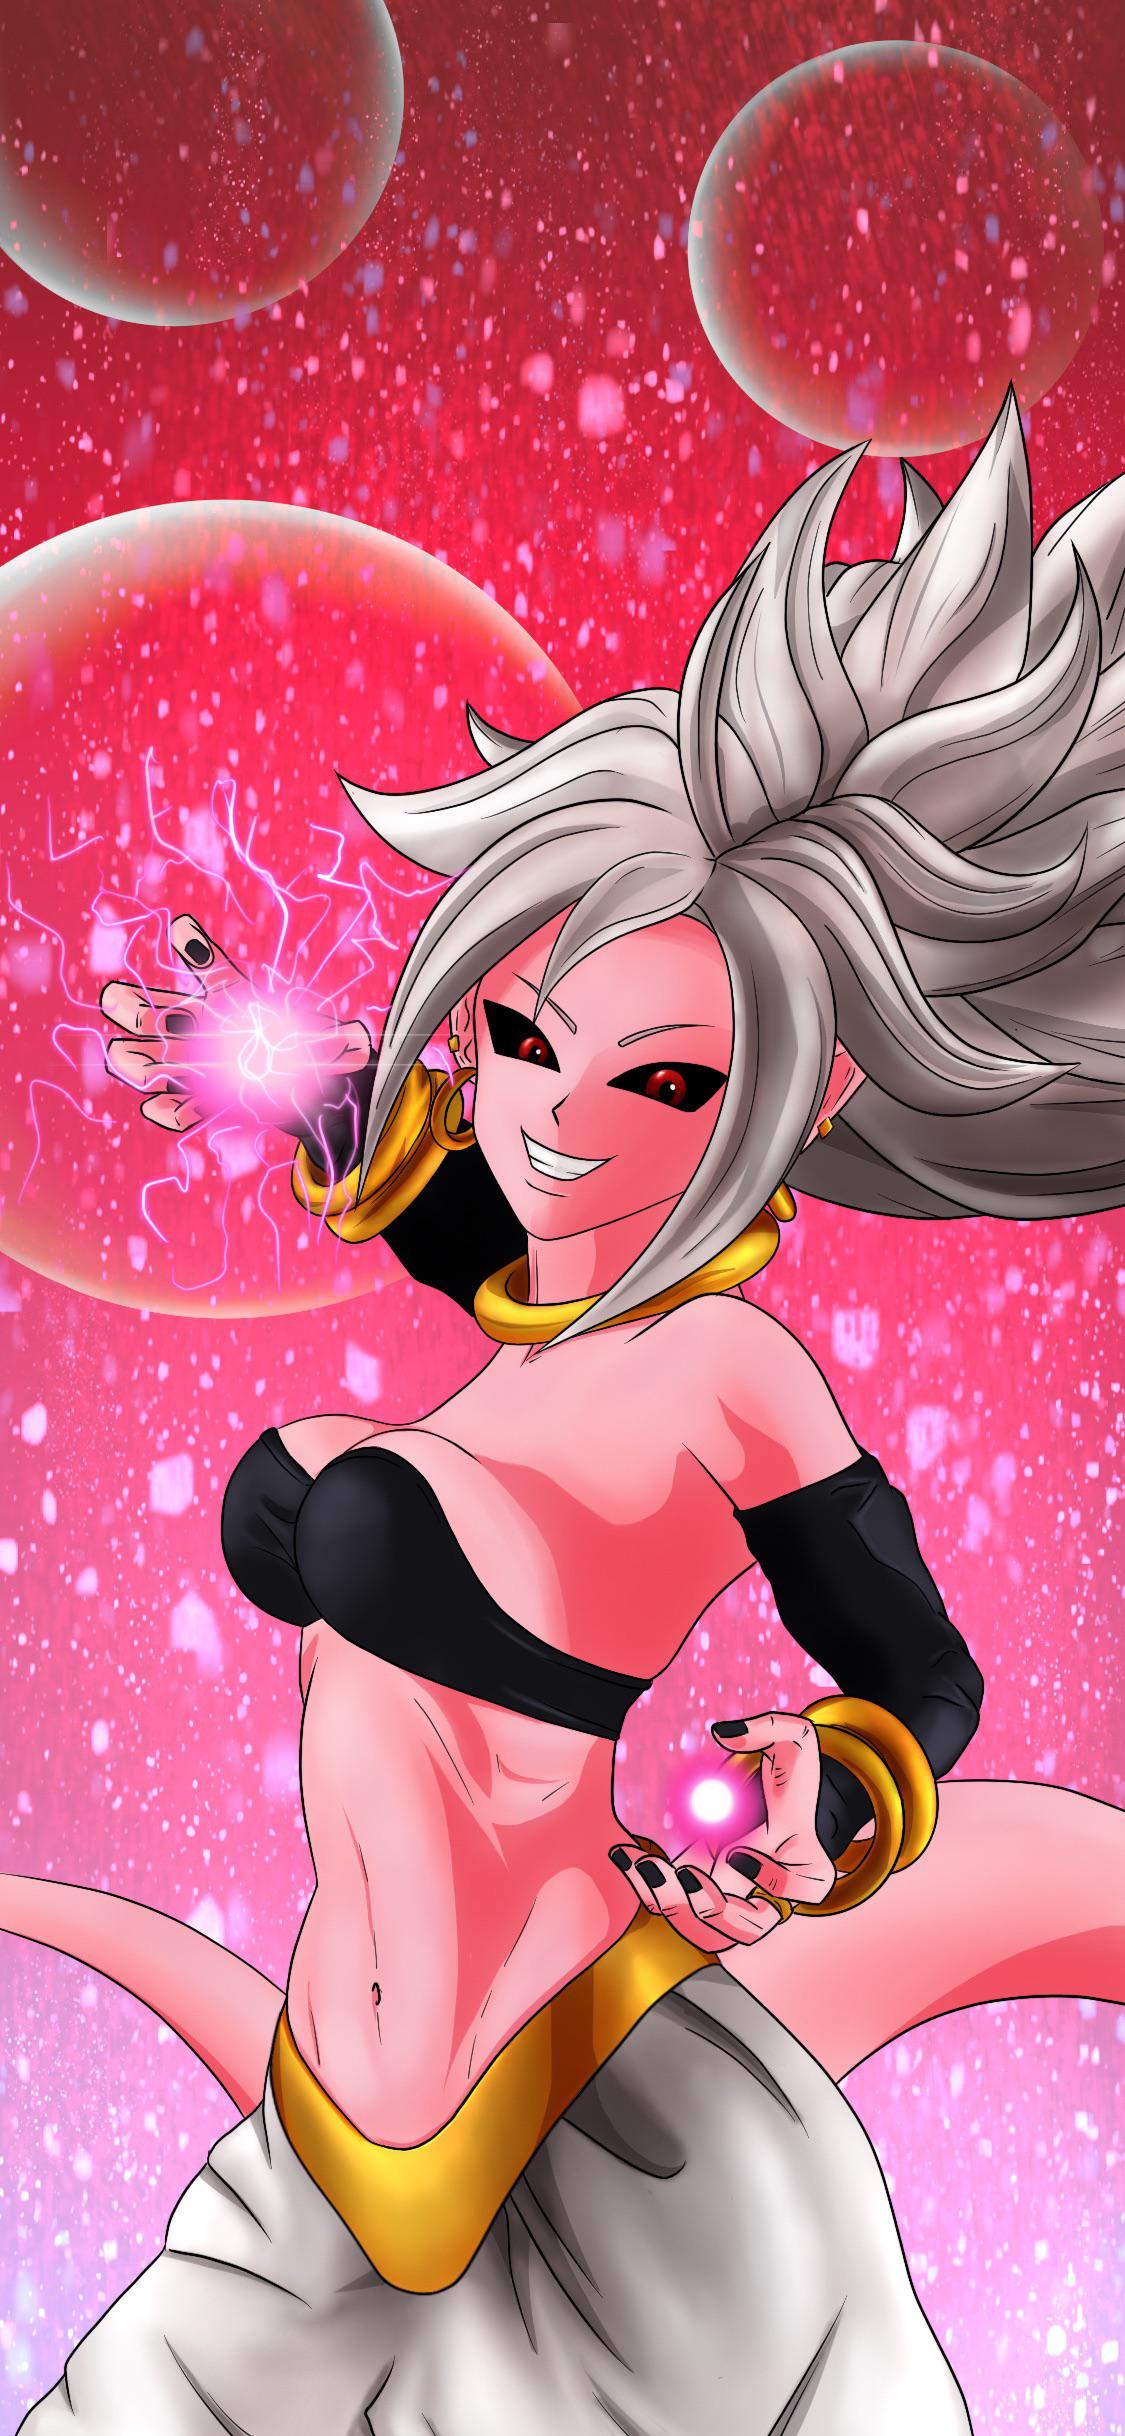 Made an Android 21 wallpaper for my gf, thought someone might want